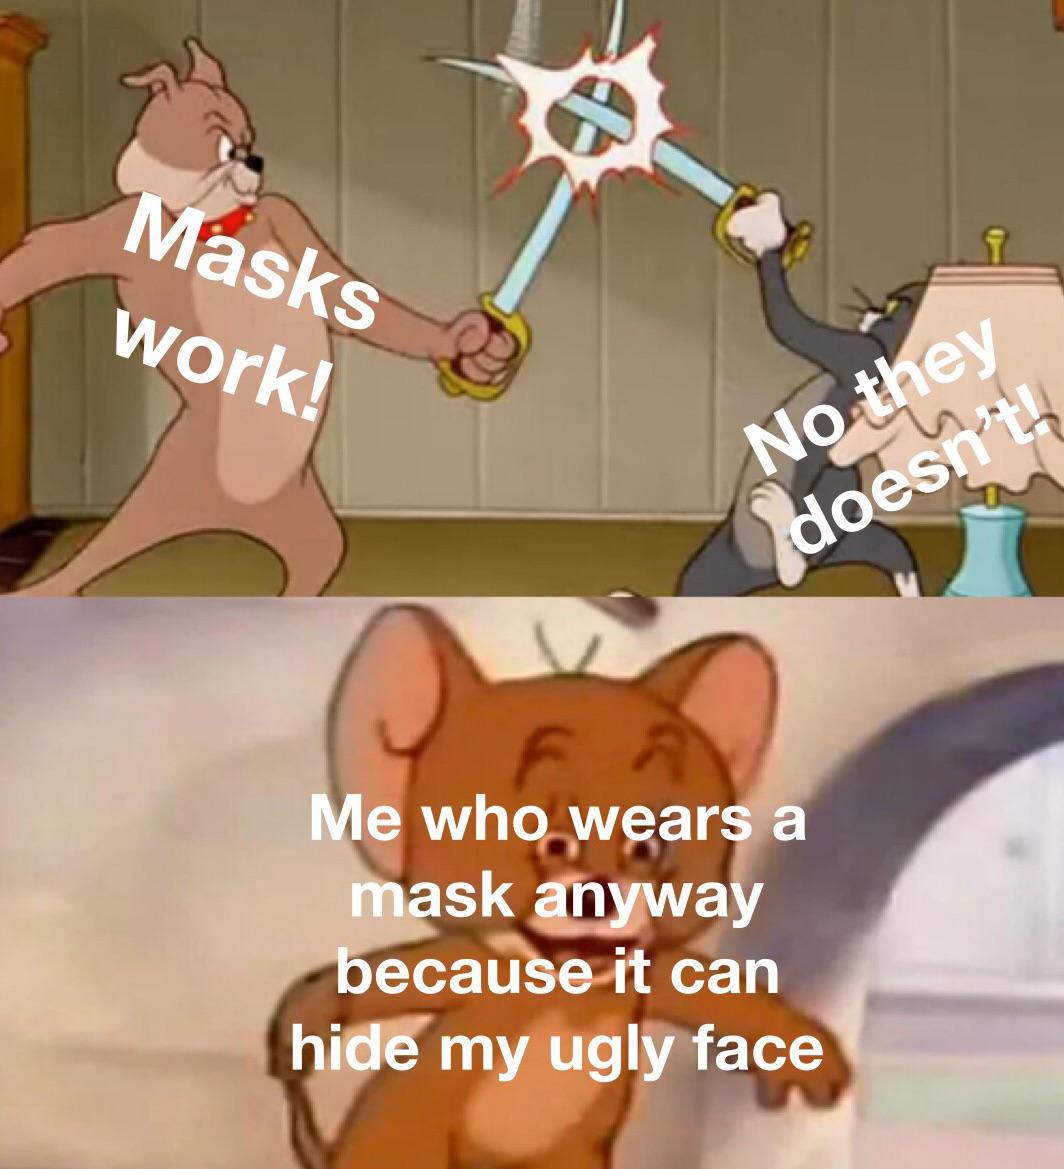 tom and jerry sword fight meme template - Masks work! No they doesn't Me who wears a mask anyway because it can hide my ugly face